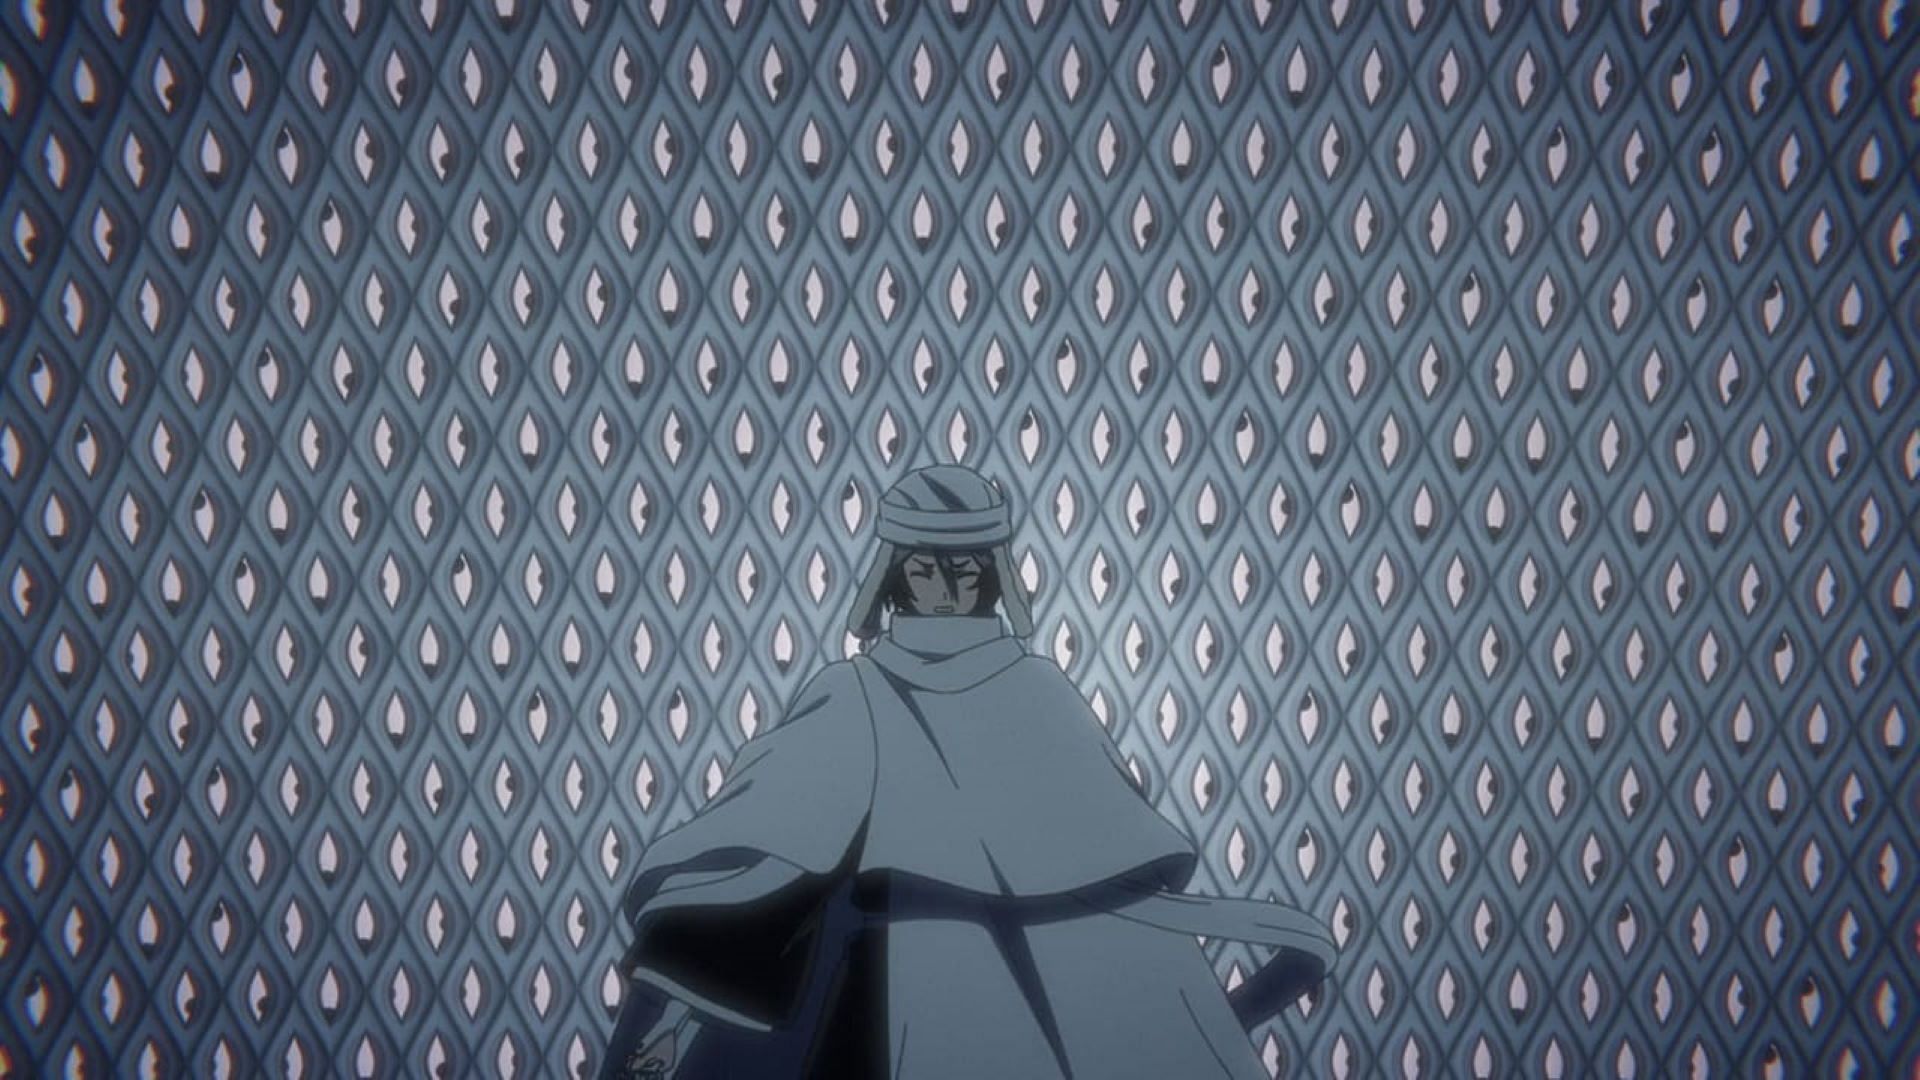 What is Tatar Foras in Bleach TYBW episode 19? As Nodt's